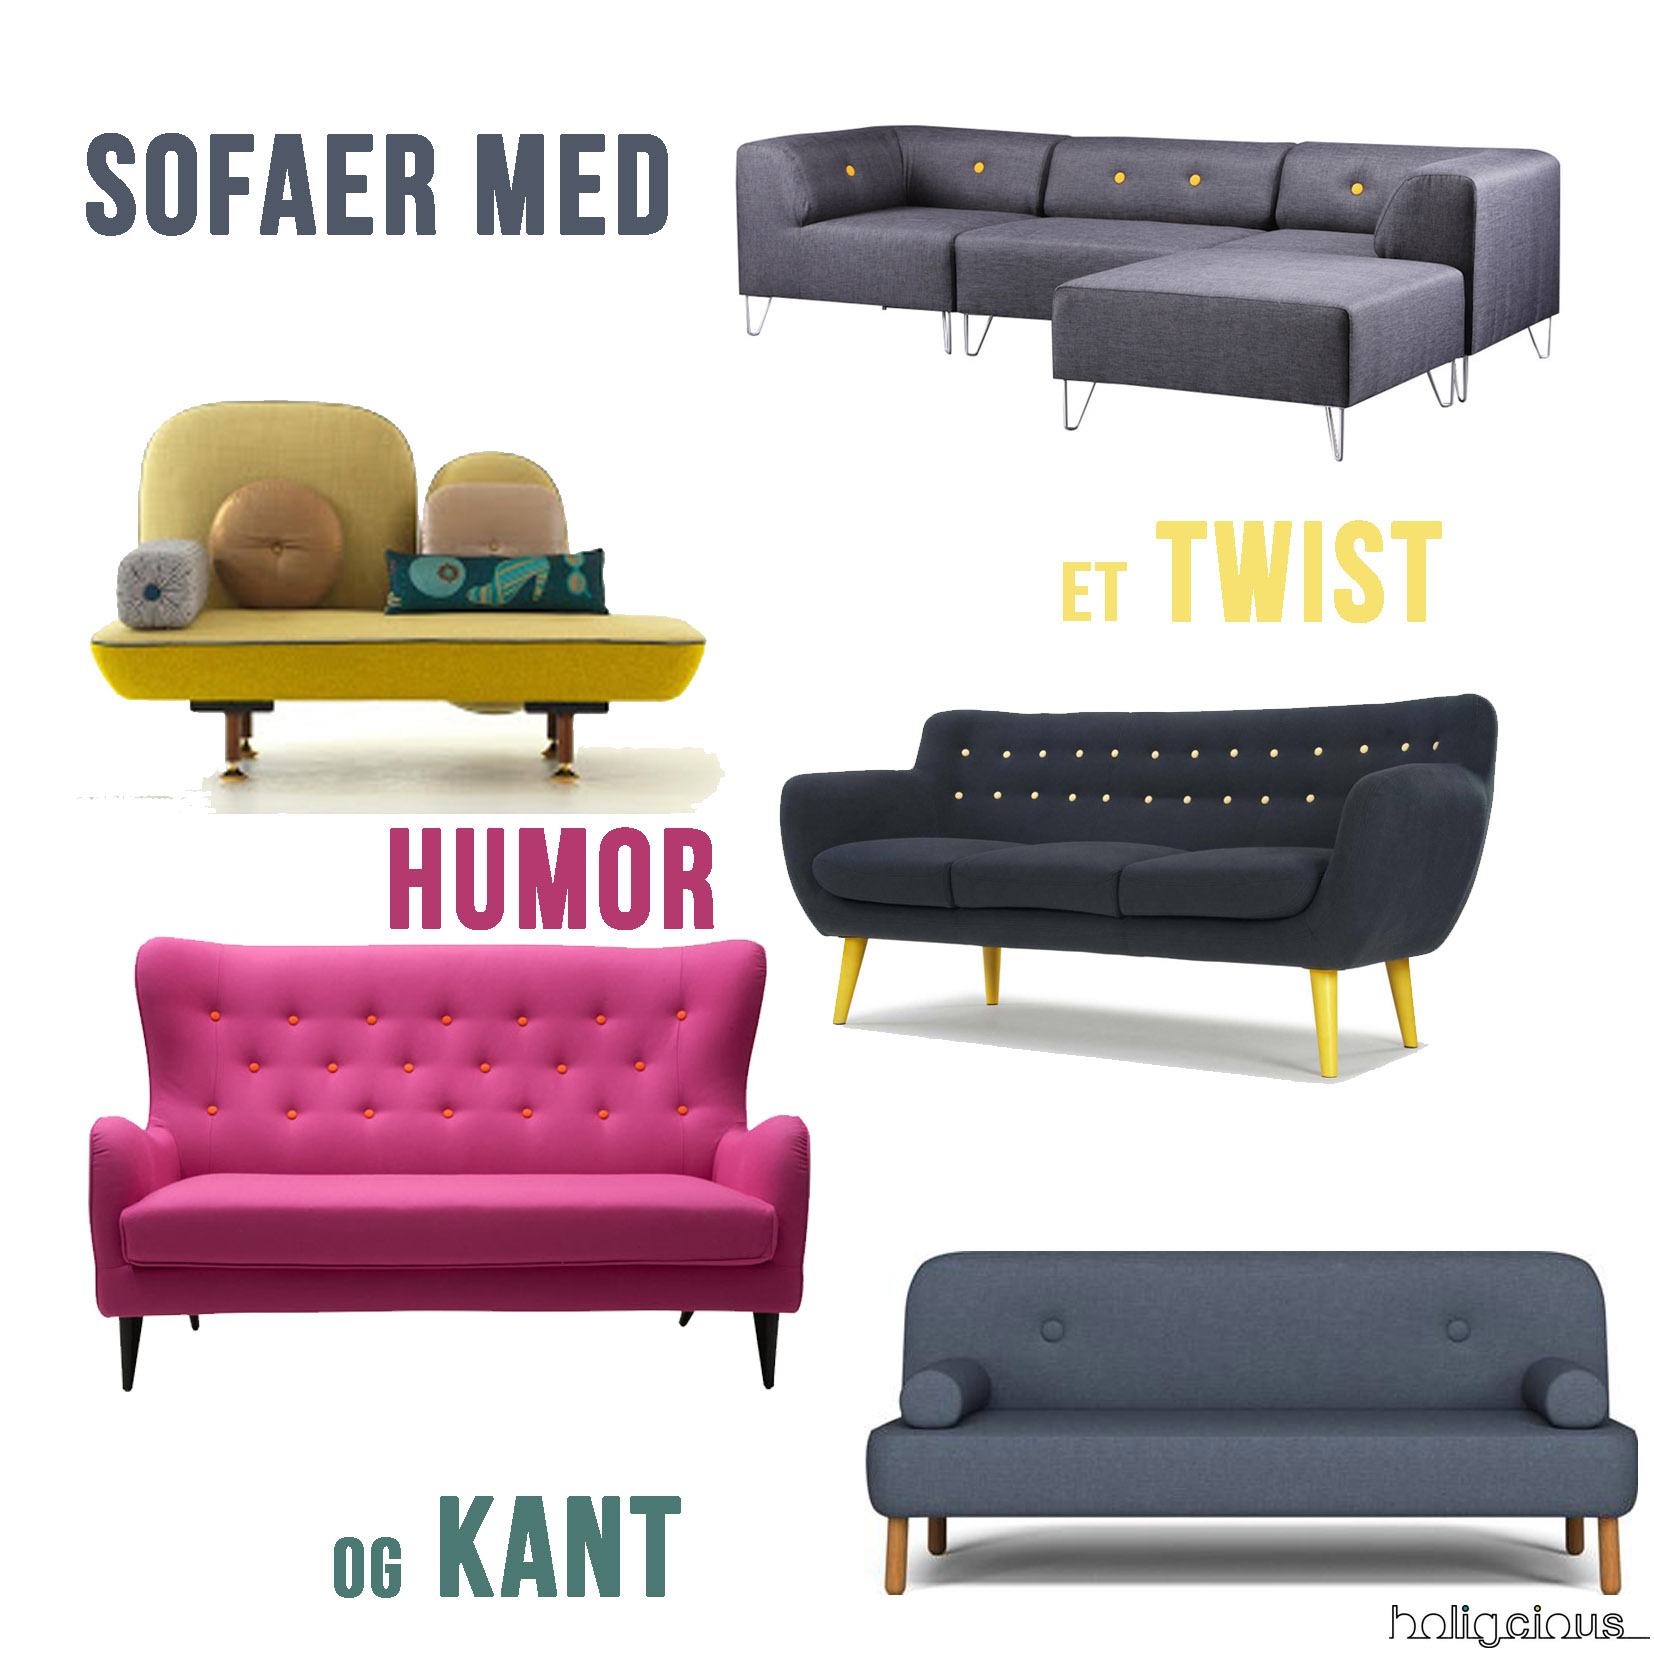 sofa-sofajagt-indret-stue-couch-chaiselong-3-personer-2-personer